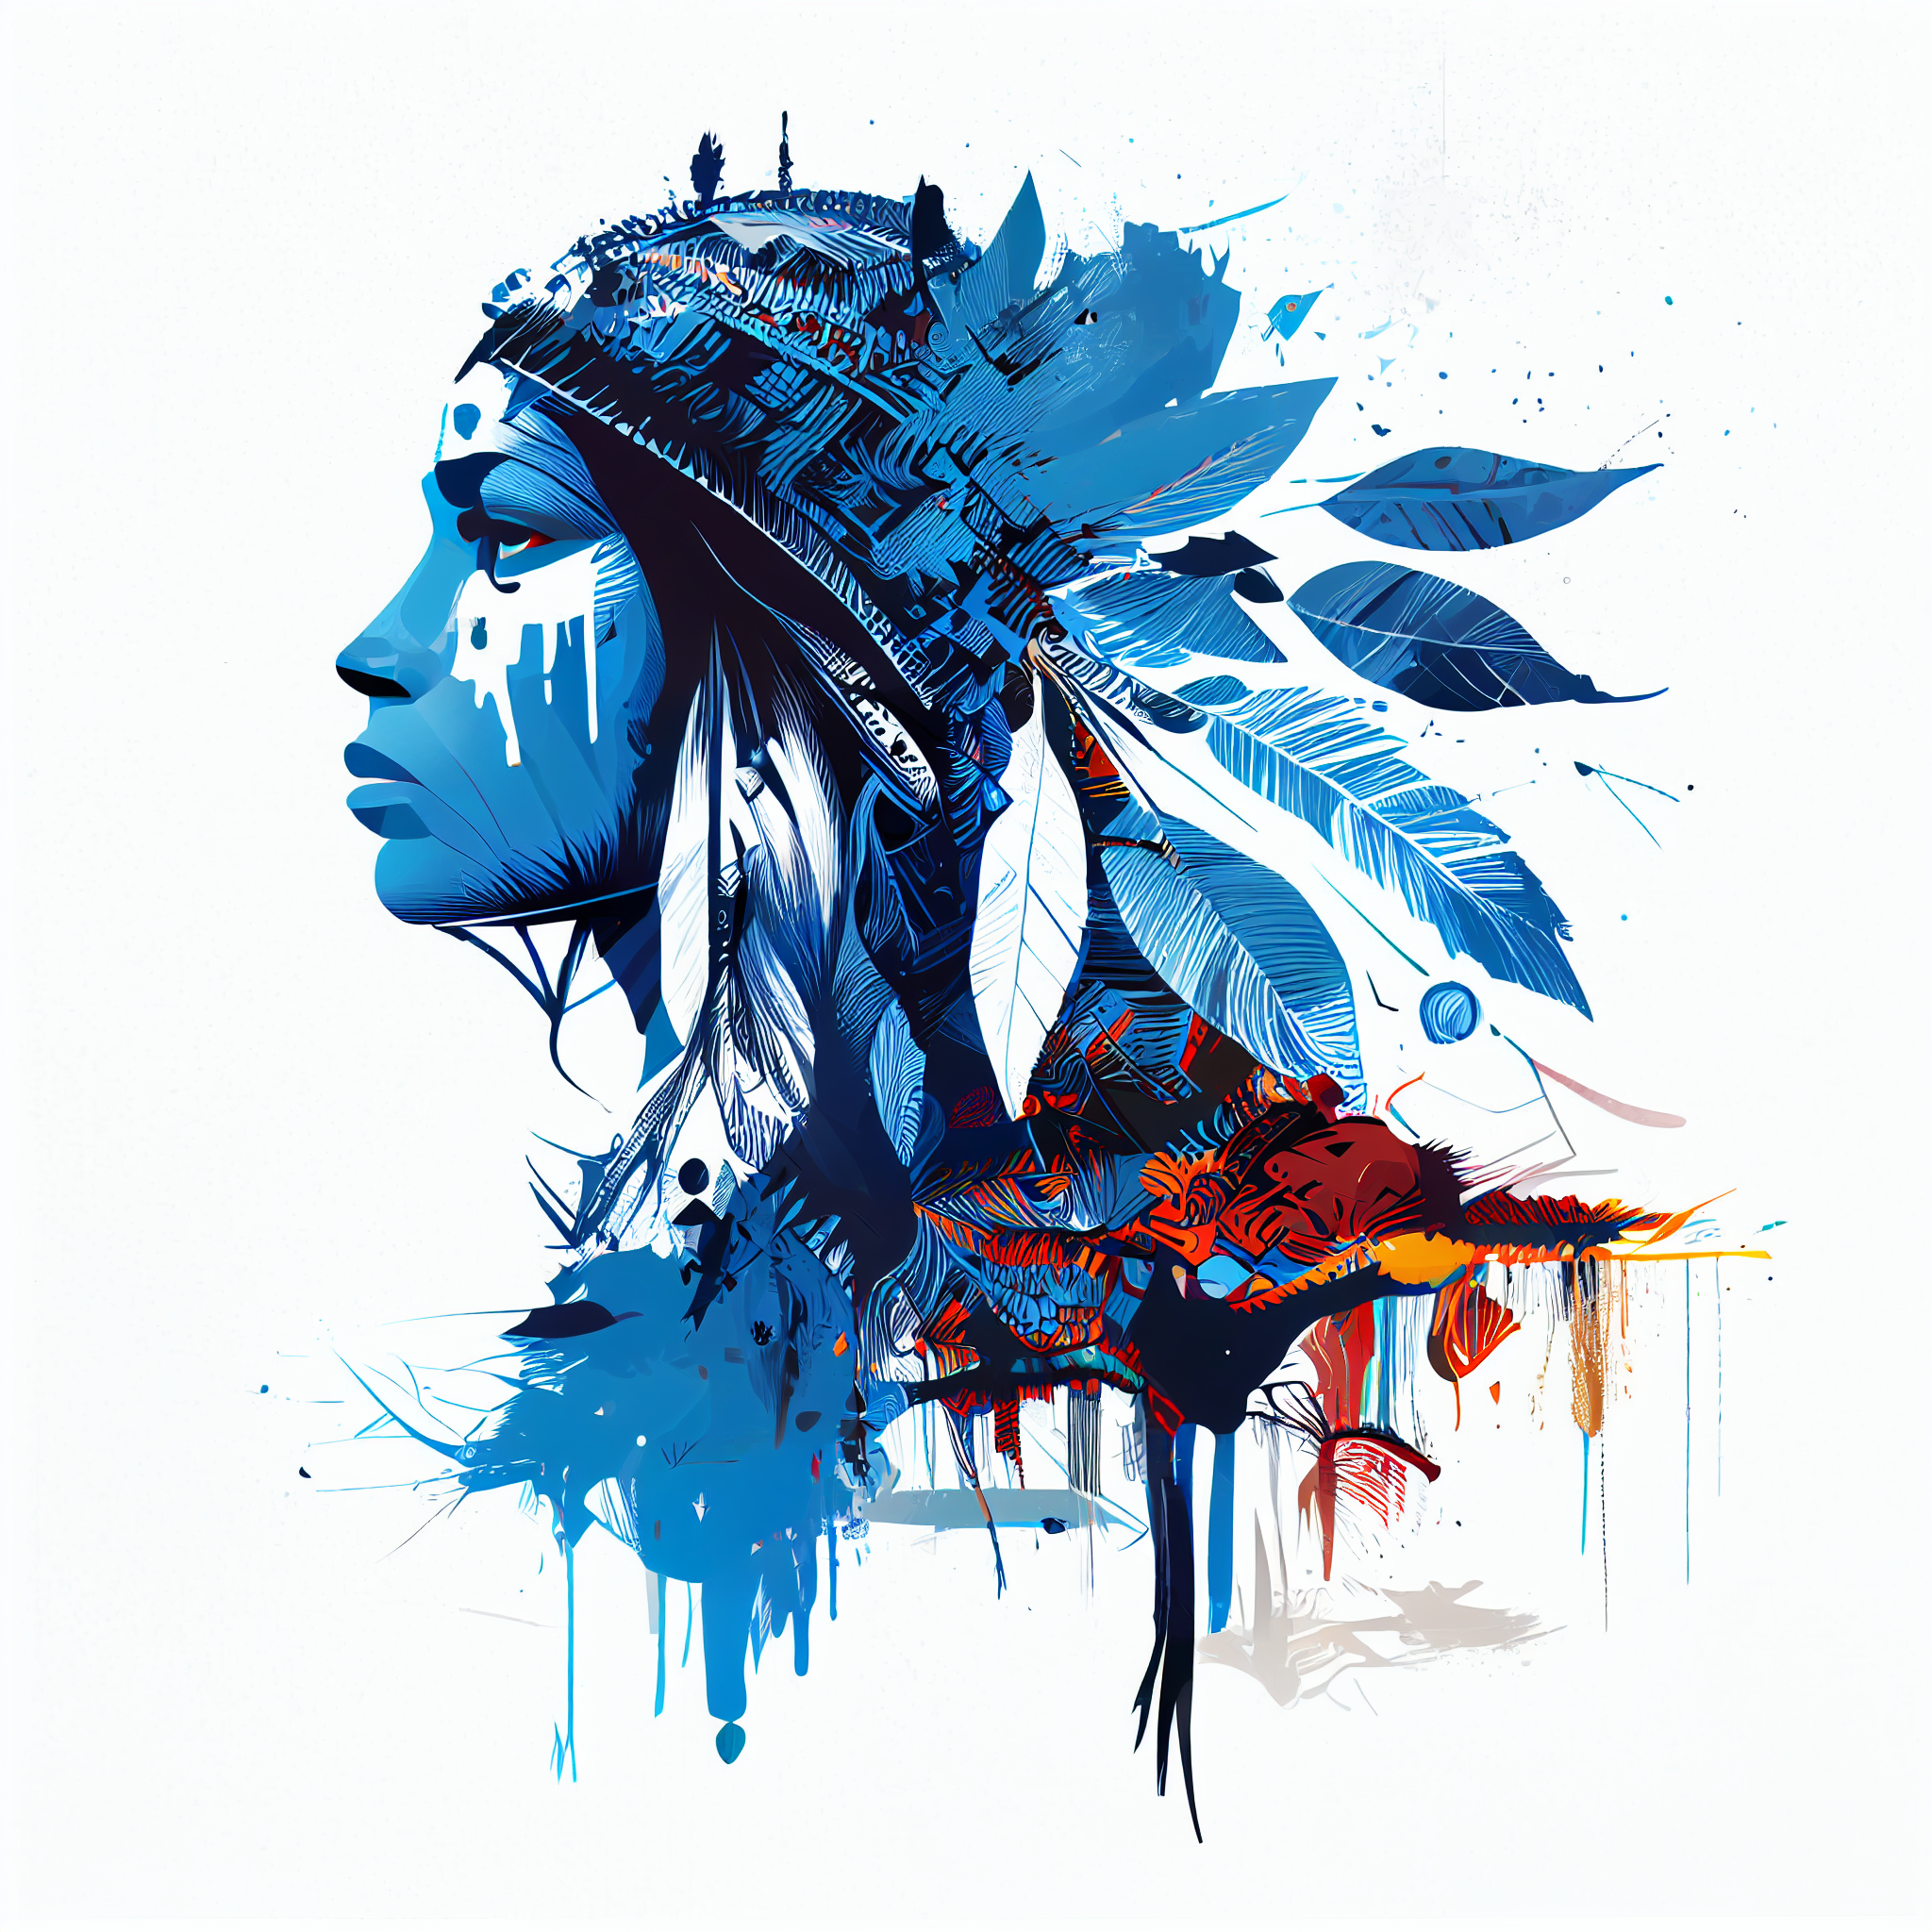 "Serene Elegance: Beautiful Blue Tribal Woman Painted in Abstract Style Print for Bedroom, Office, and Gift Decor"